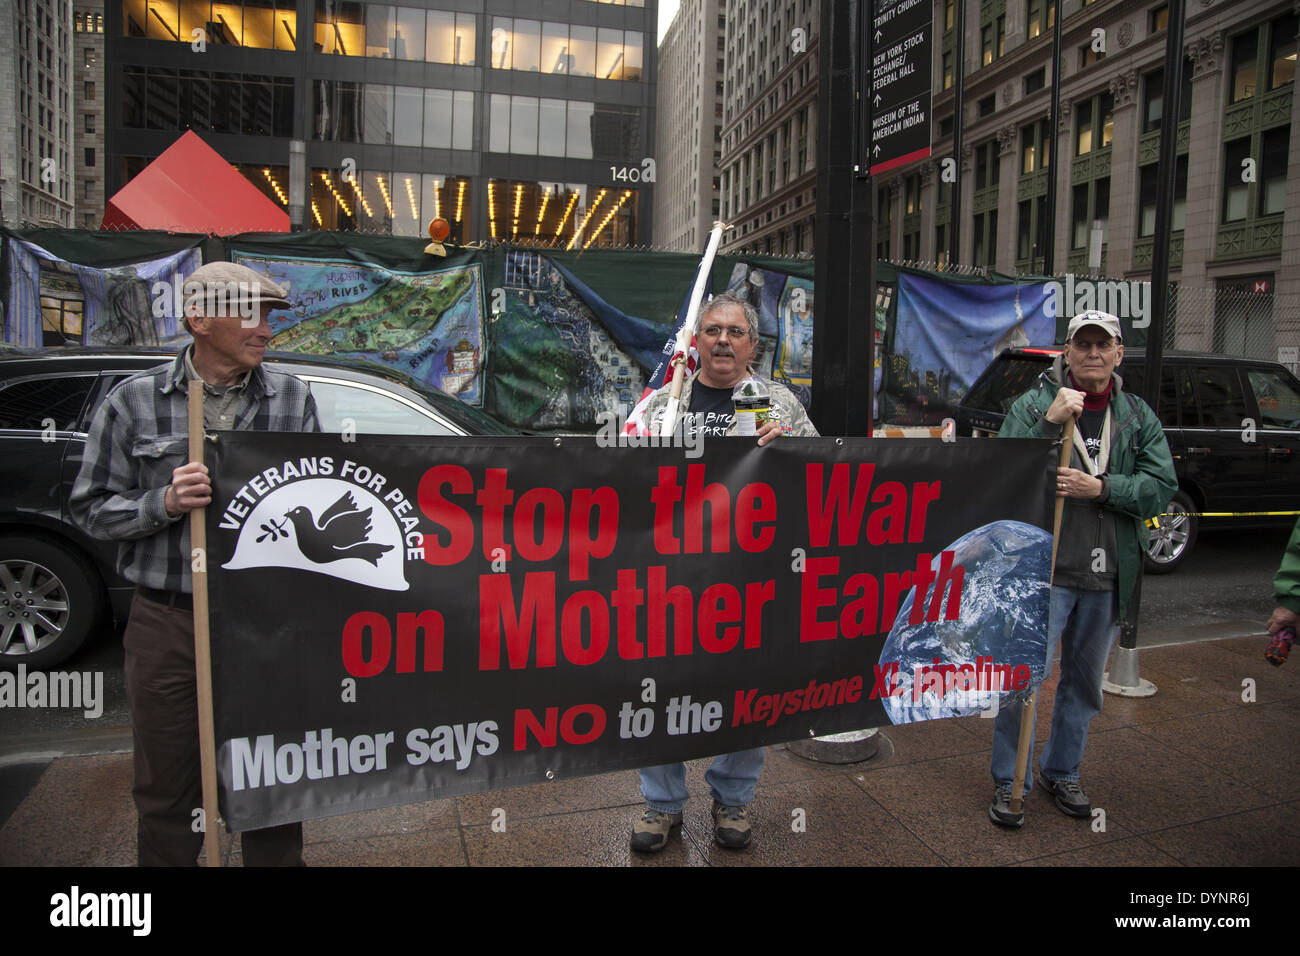 New York, NY, USA . 22nd Apr, 2014. Environmental activists rally on Earth Day at Zuccotti Park, then march to Wall Street calling for system change not climate change. The Occupy movement is still around in NYC it seems. Credit:  David Grossman/Alamy Live News Stock Photo